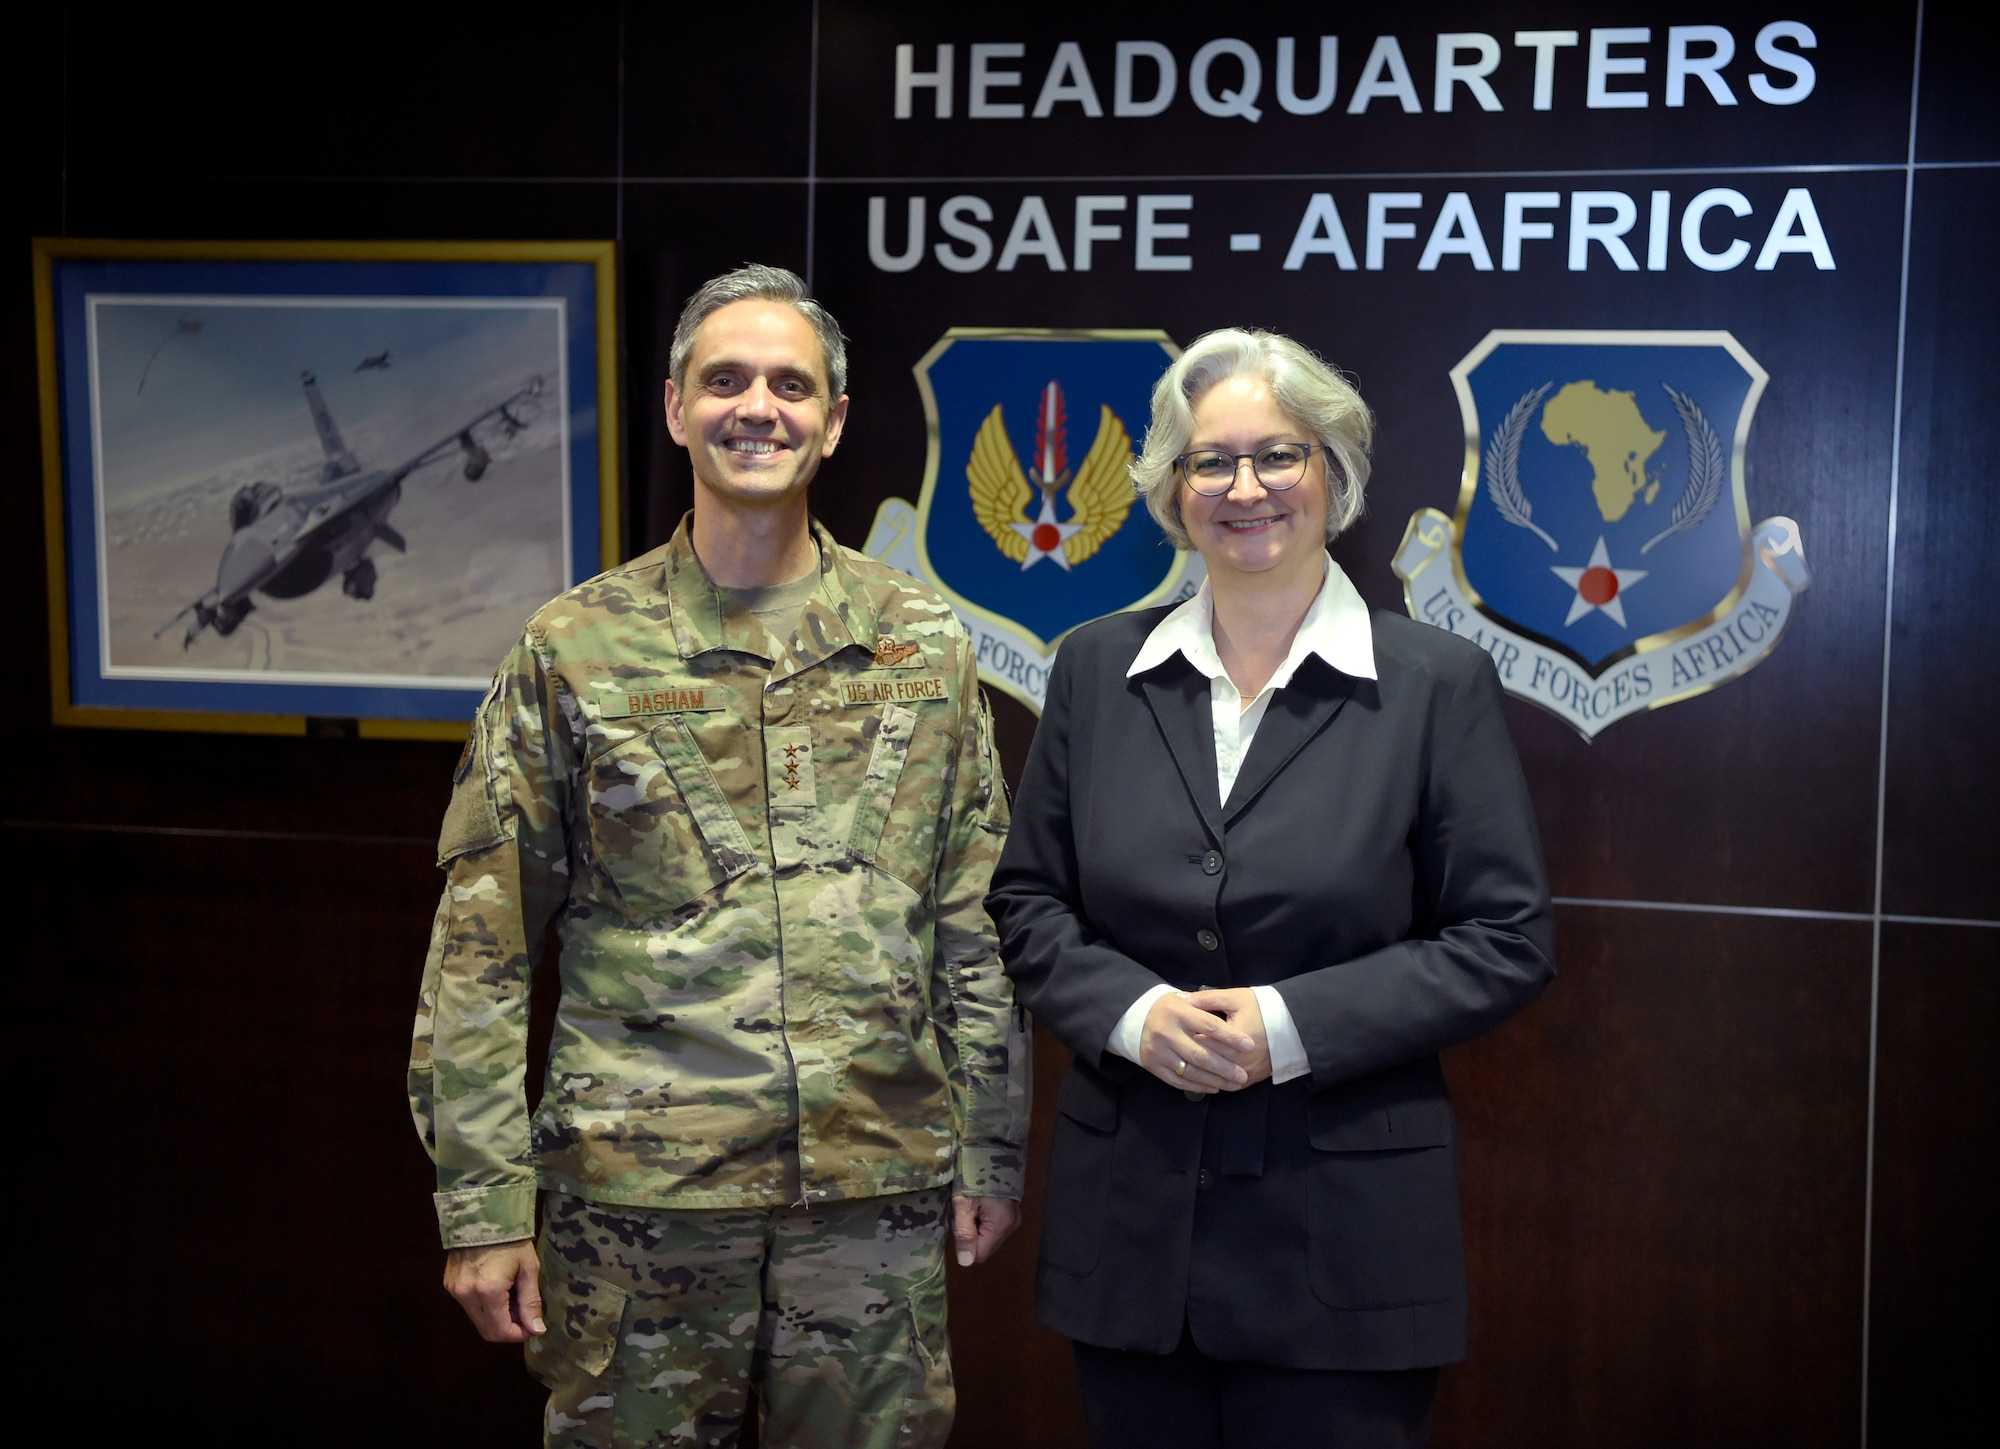 Lt. Gen. Steven Basham, U.S. Air Forces in Europe and Air Forces Africa deputy commander, and Mrs. Barbara Wießalla, Chief of the German Ministry of Defense's Infrastructure, Environment and Services Division stand together for a photo at USAFE - AFAFRICA headquarters, Ramstein Air Base, Germany, July 12, 2019. Wießalla traveled to USAFE - AFAFRICA headquarters for an immersion visit to better understand the functions of the air component. (U.S. Air Force photo by Tech. Sgt. Stephen Ocenosak)